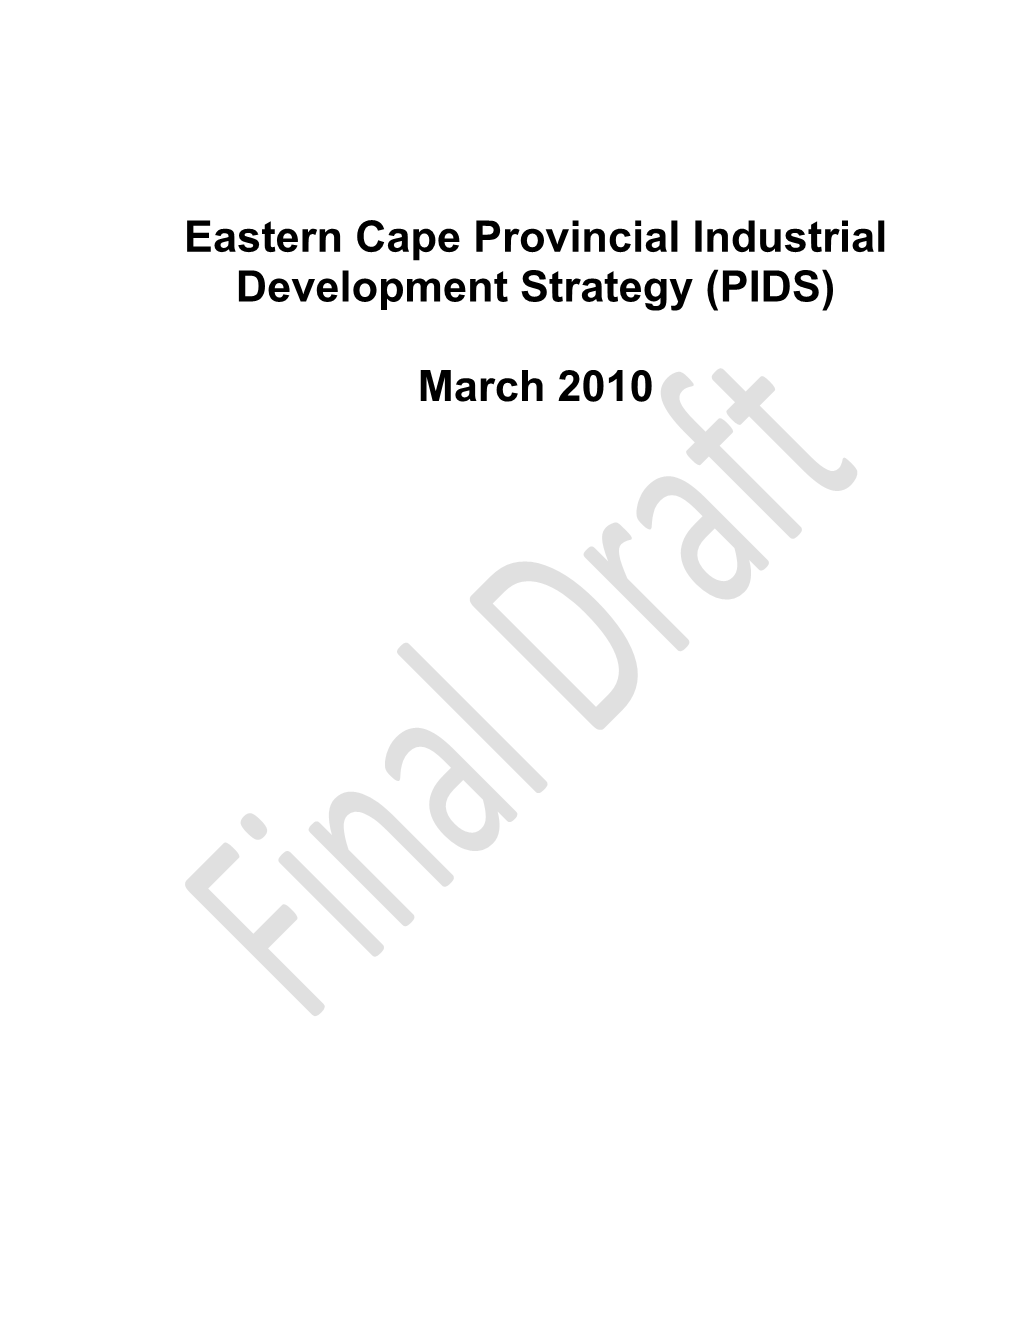 Eastern Cape Provincial Industrial Development Strategy (PIDS)